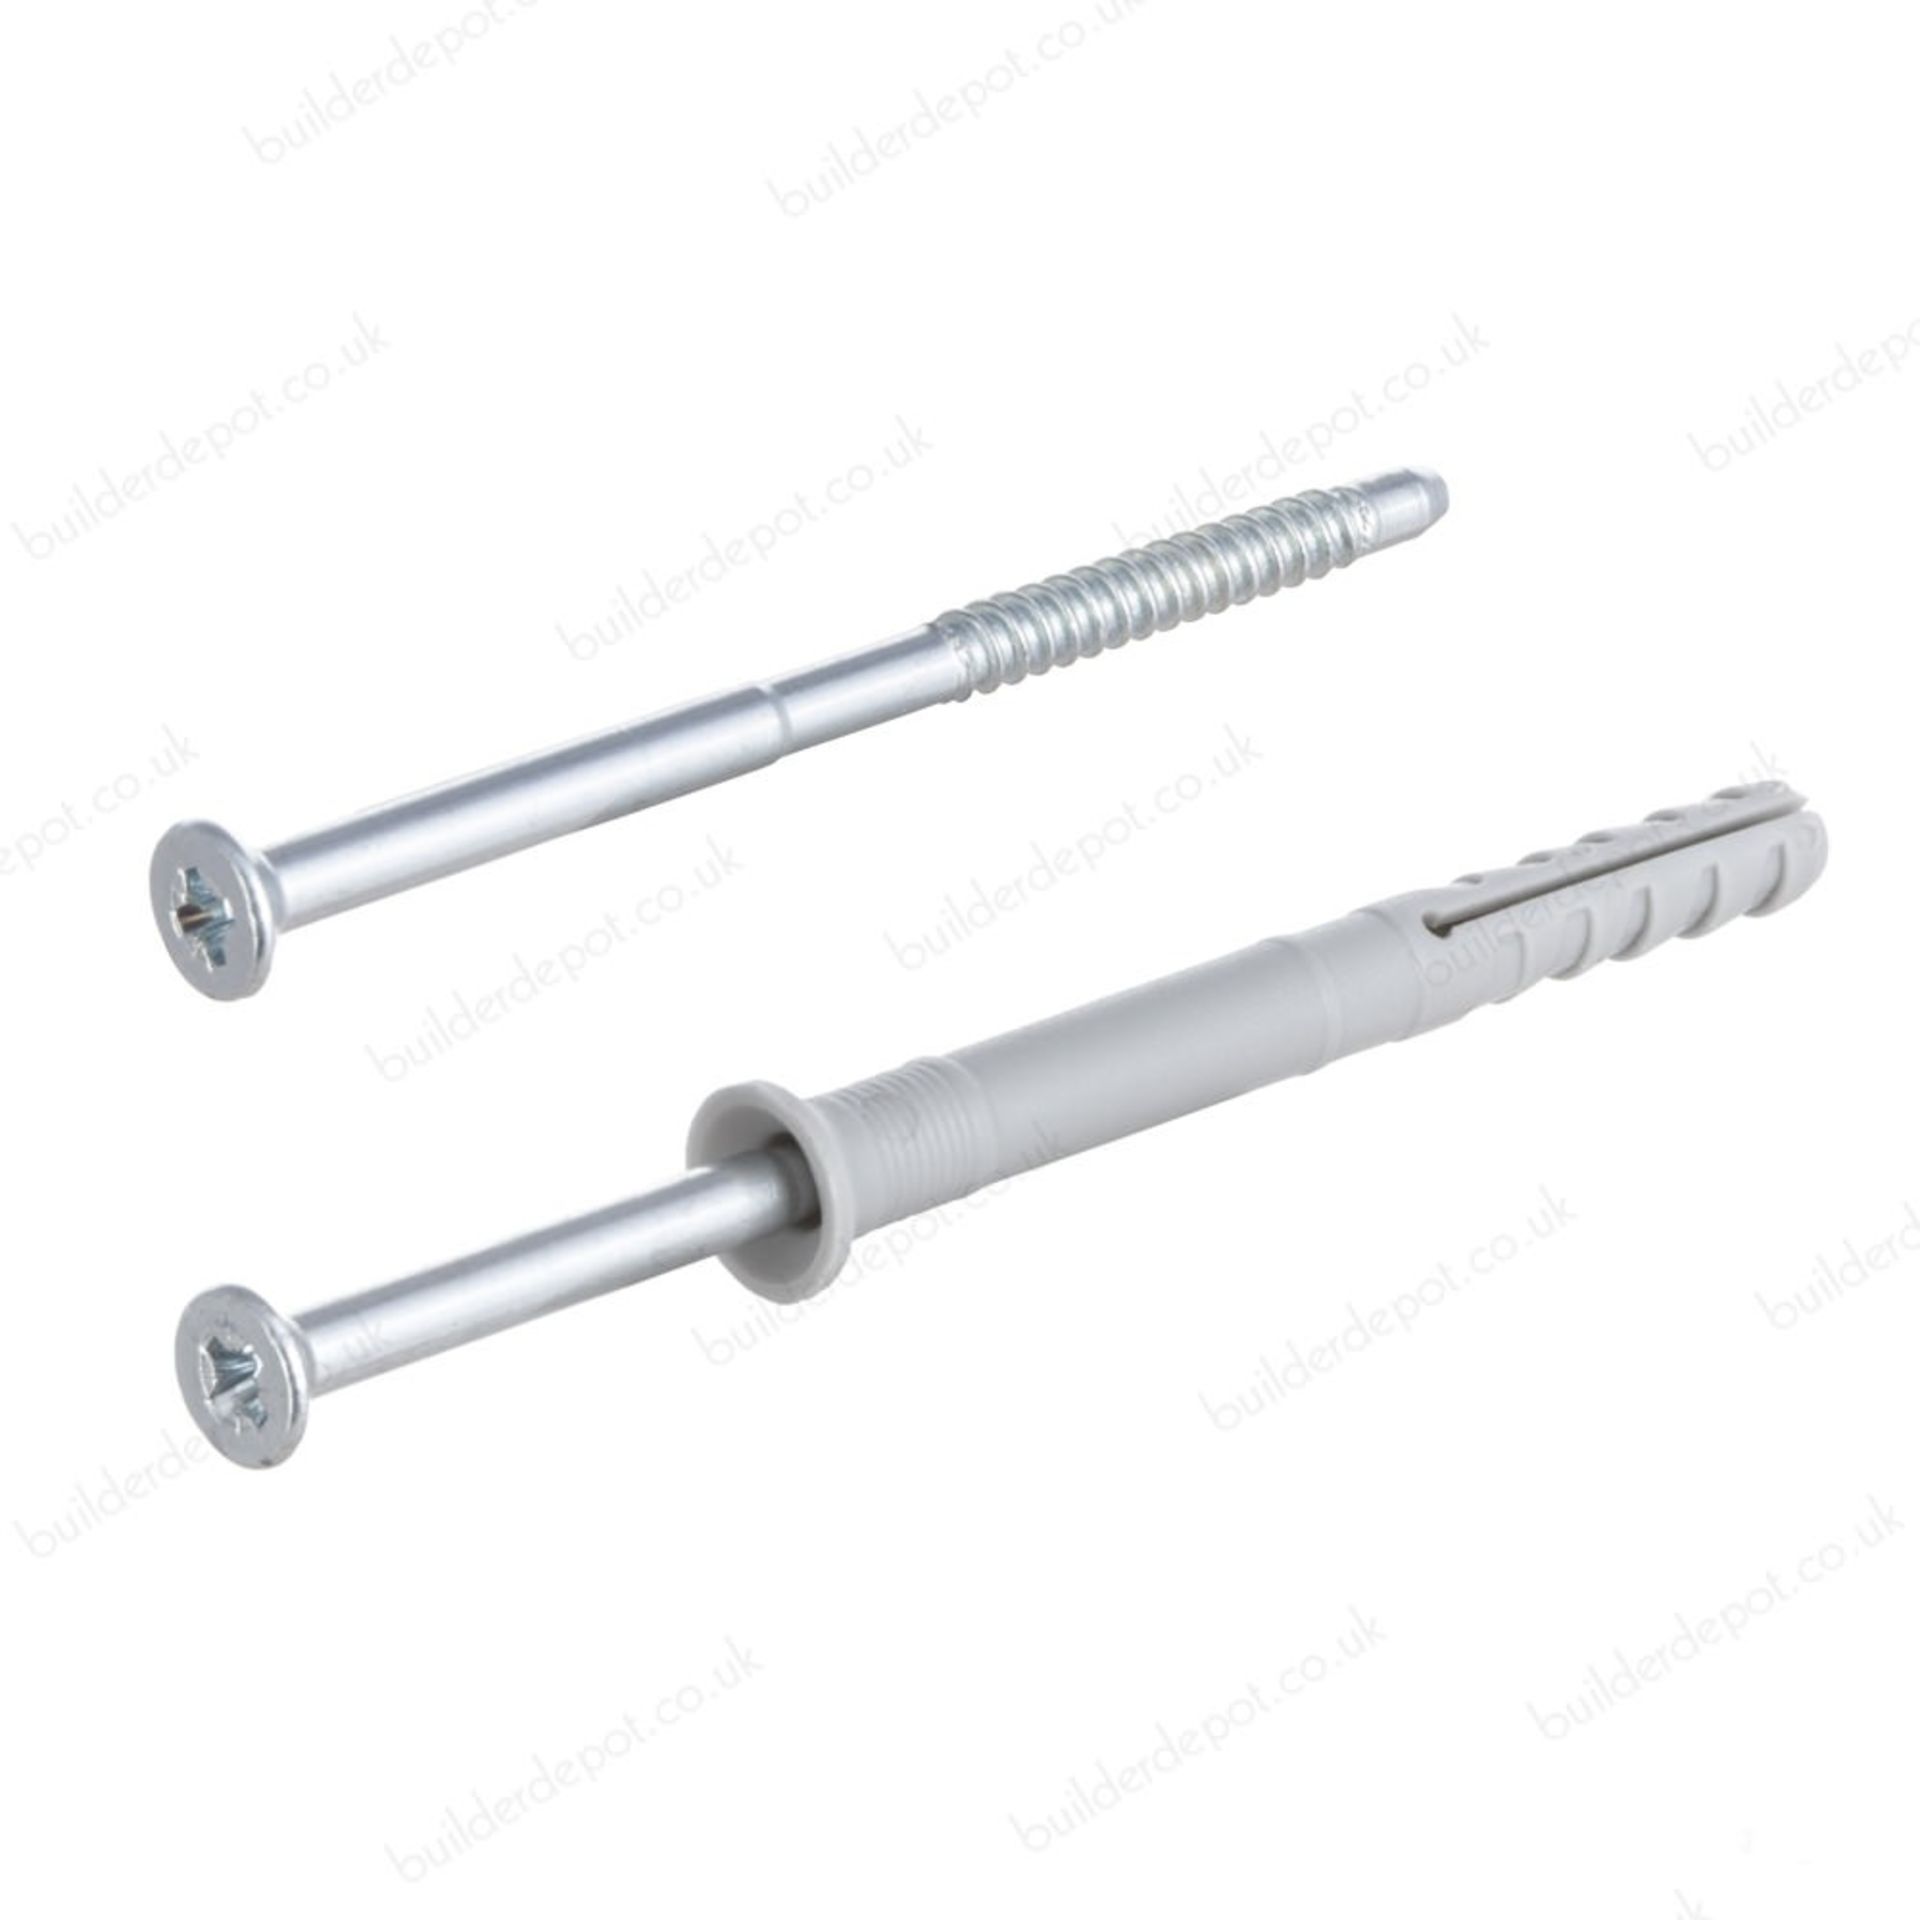 V Two Packs Fischer fixings 8 mm  x 80  mm  20 per  pack hammer in    fixings X  8  Bid price to